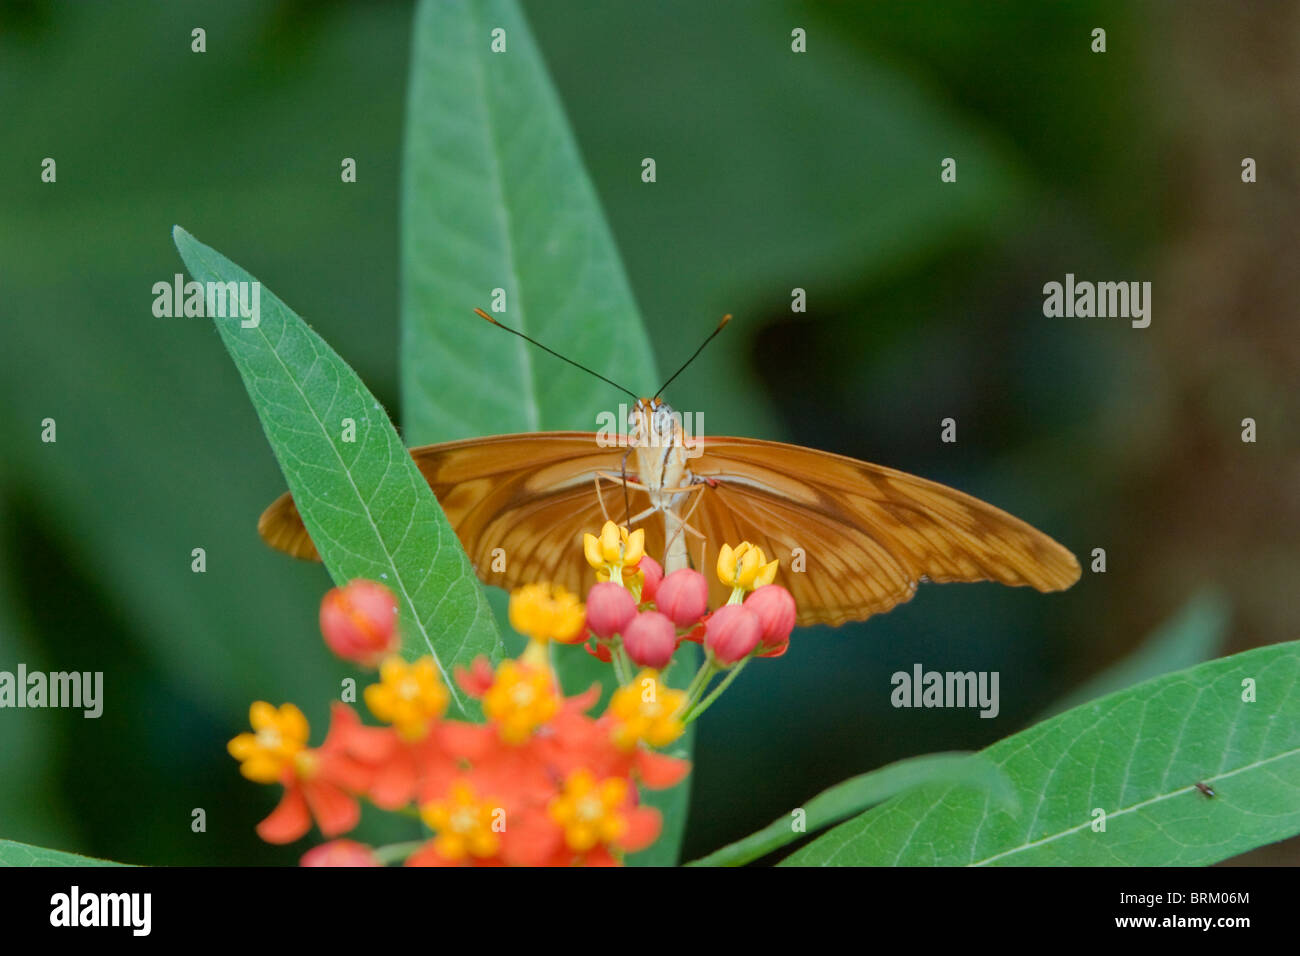 Unidentified Butterfly perched on a flowering plant Stock Photo